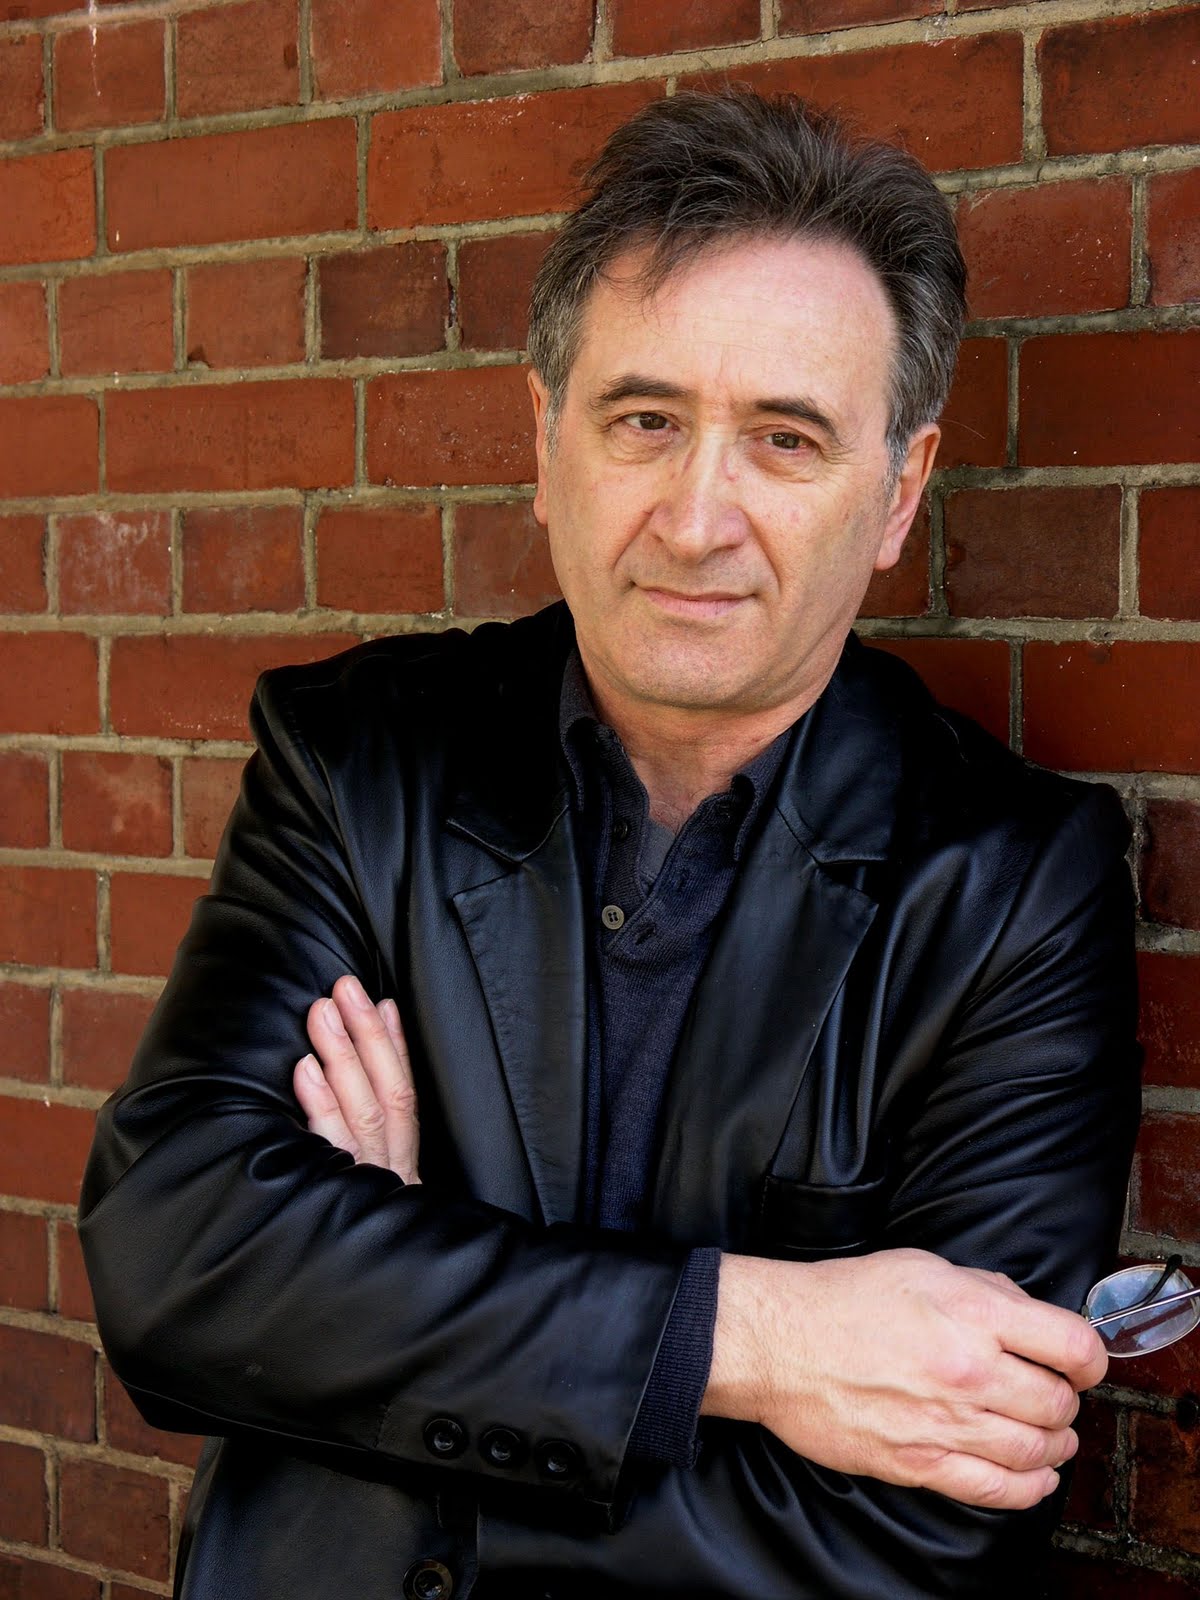 Going Places: An Interview with George Szirtes